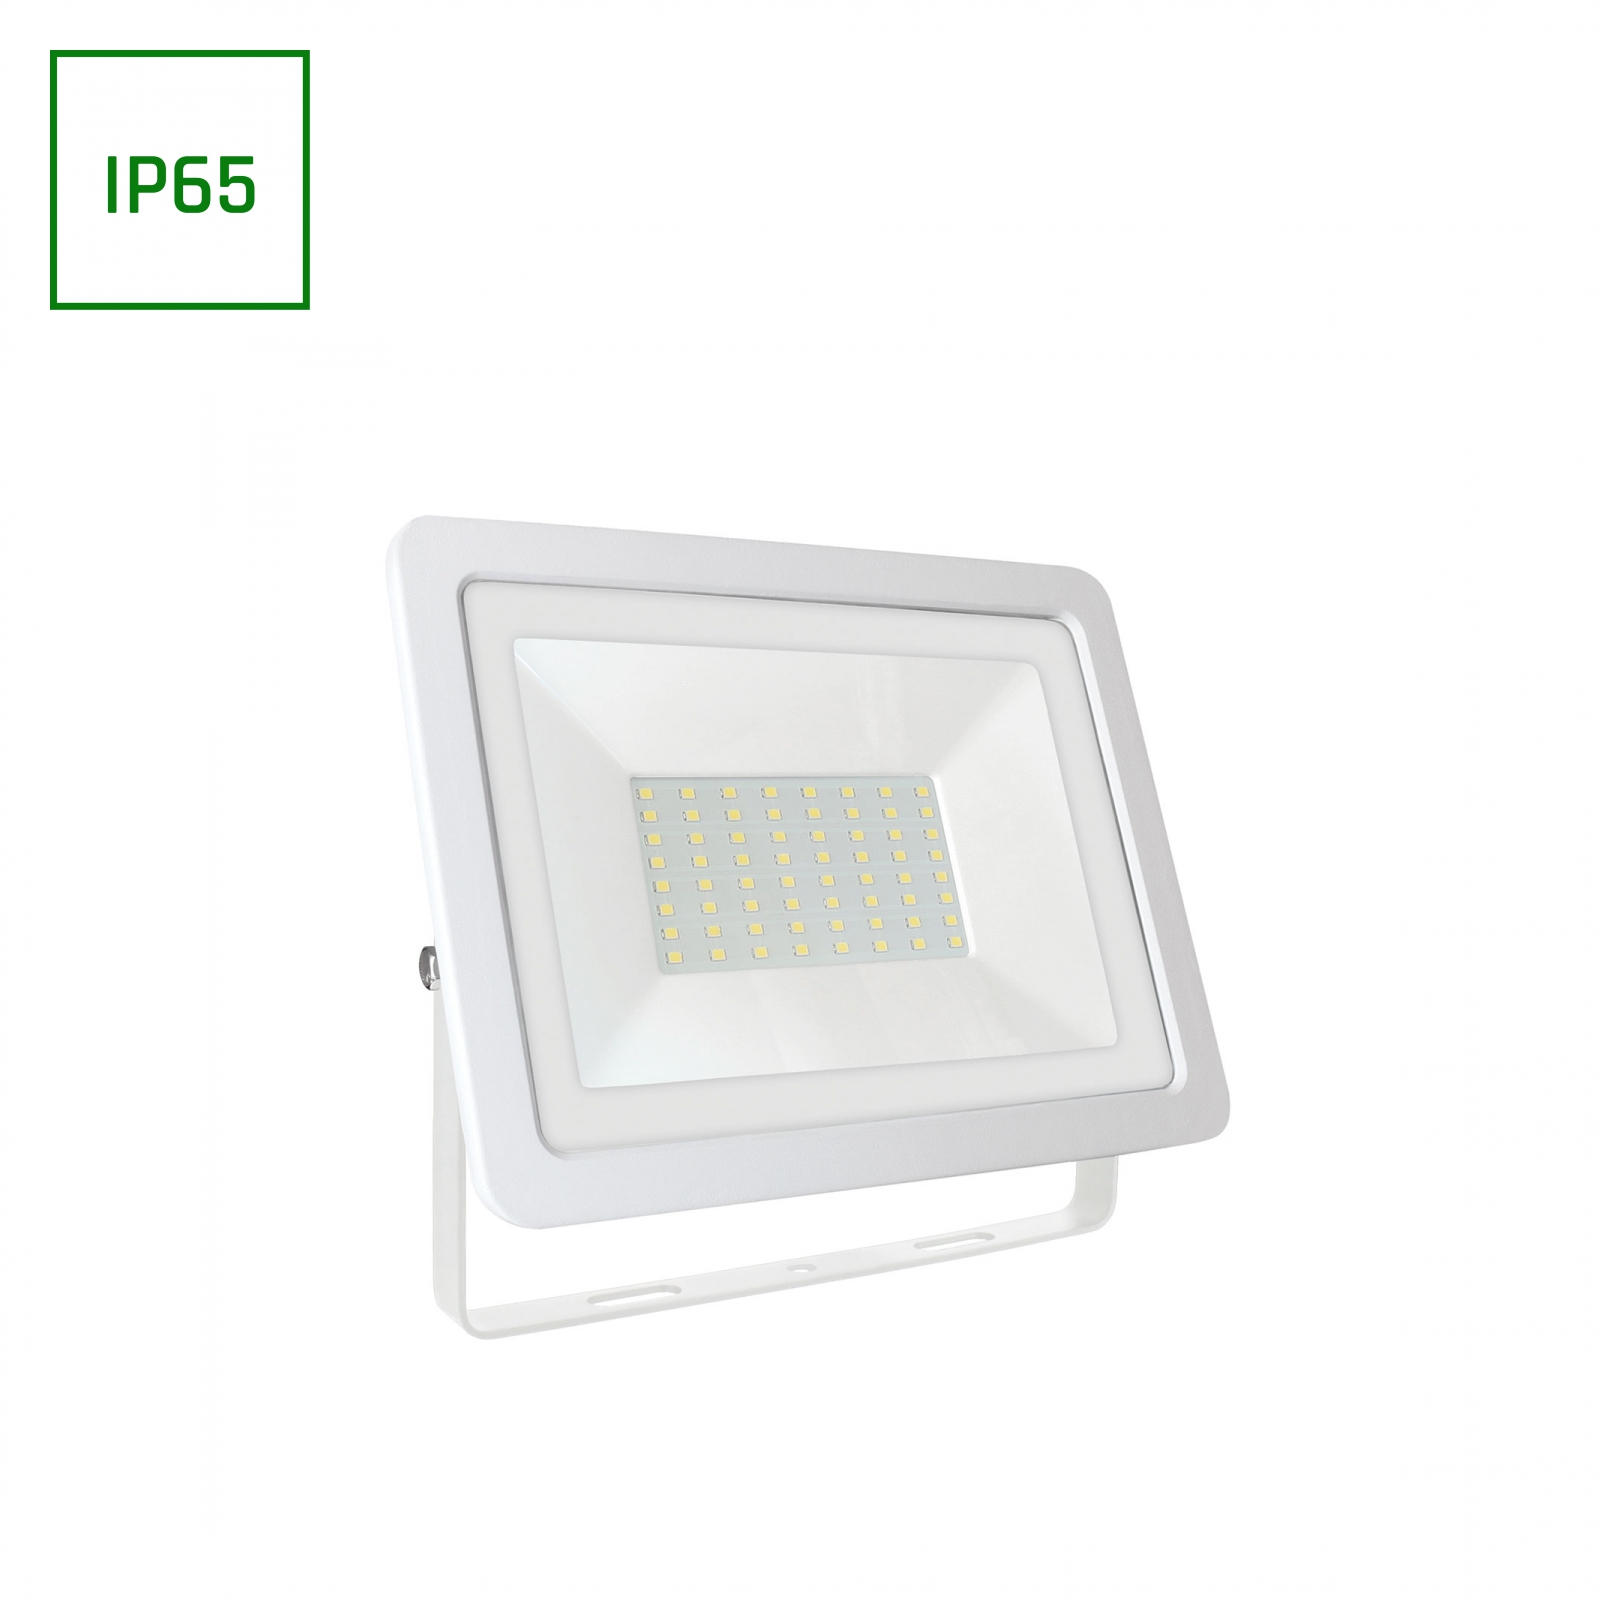 NOCTIS LUX2 SMD 230V 50W IP65 CW white